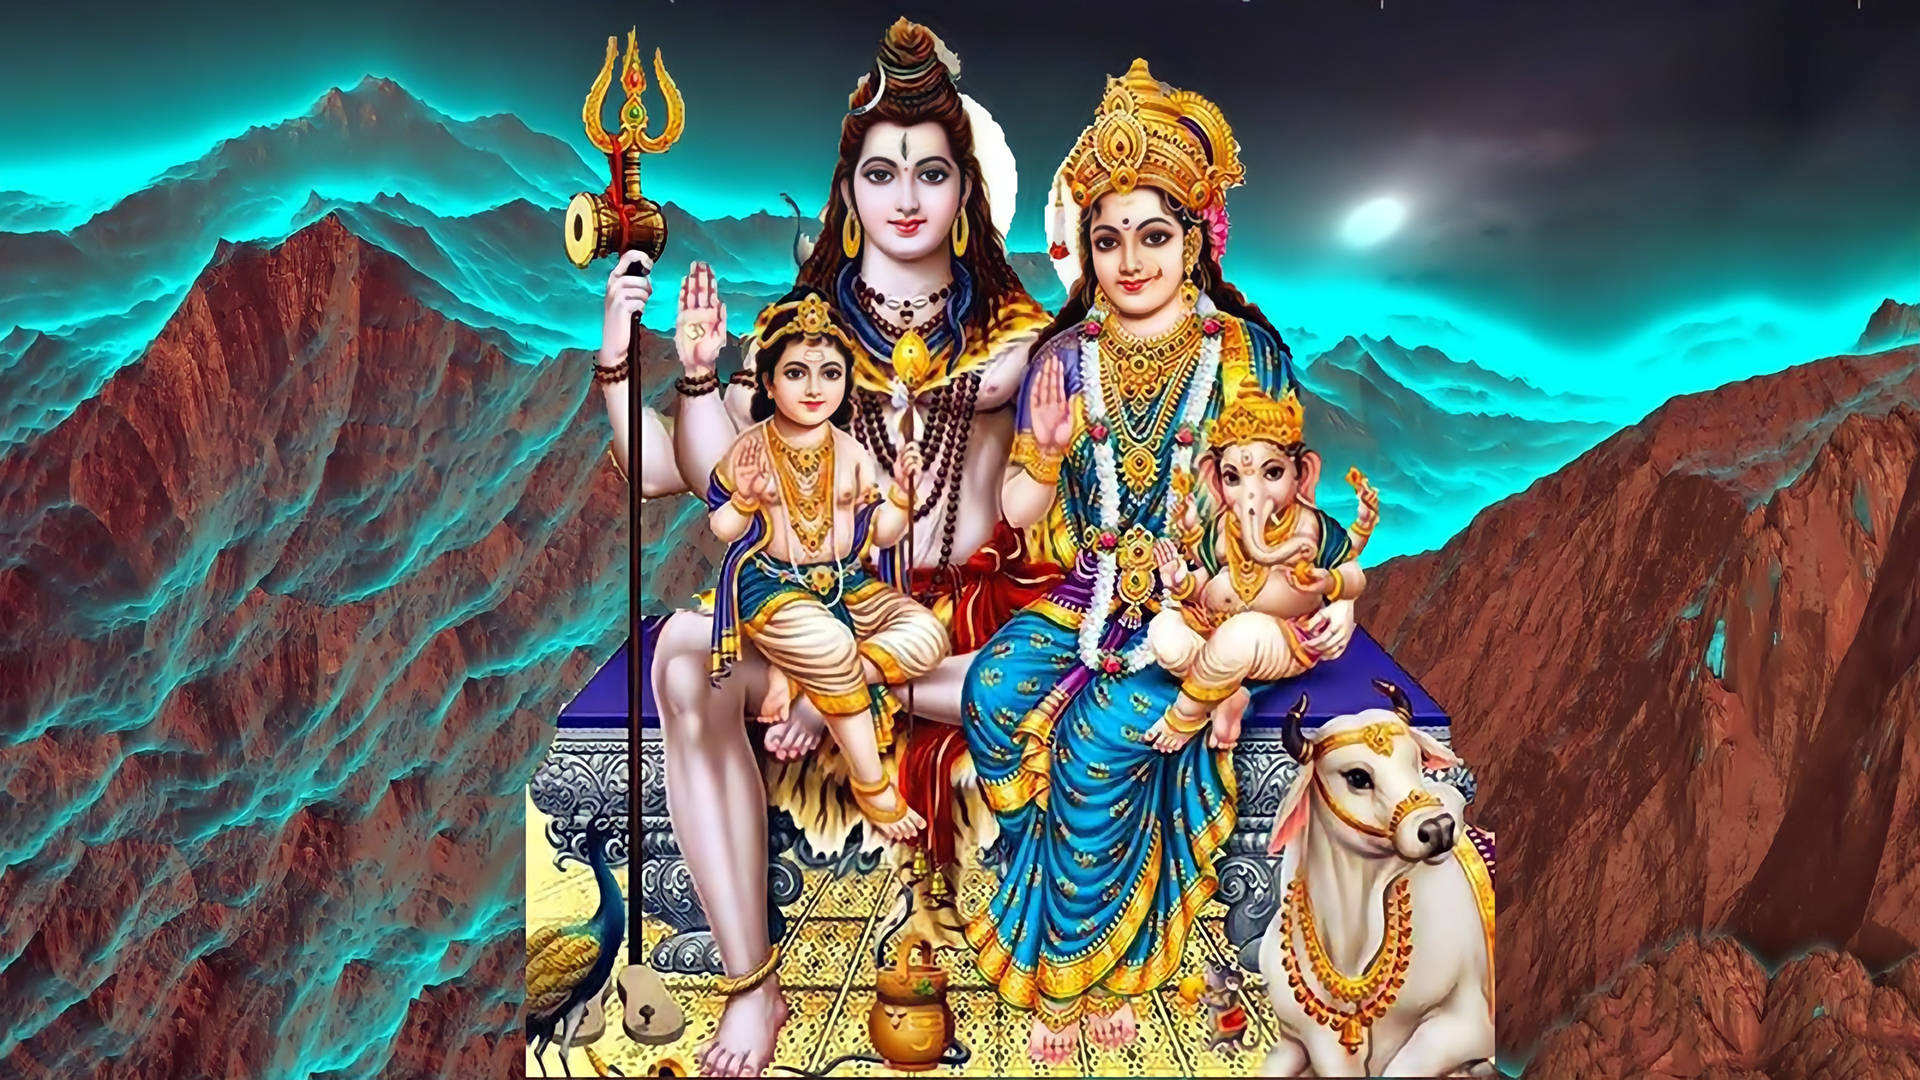 Free Shiva Parvati Pictures , [100+] Shiva Parvati Pictures for FREE |  